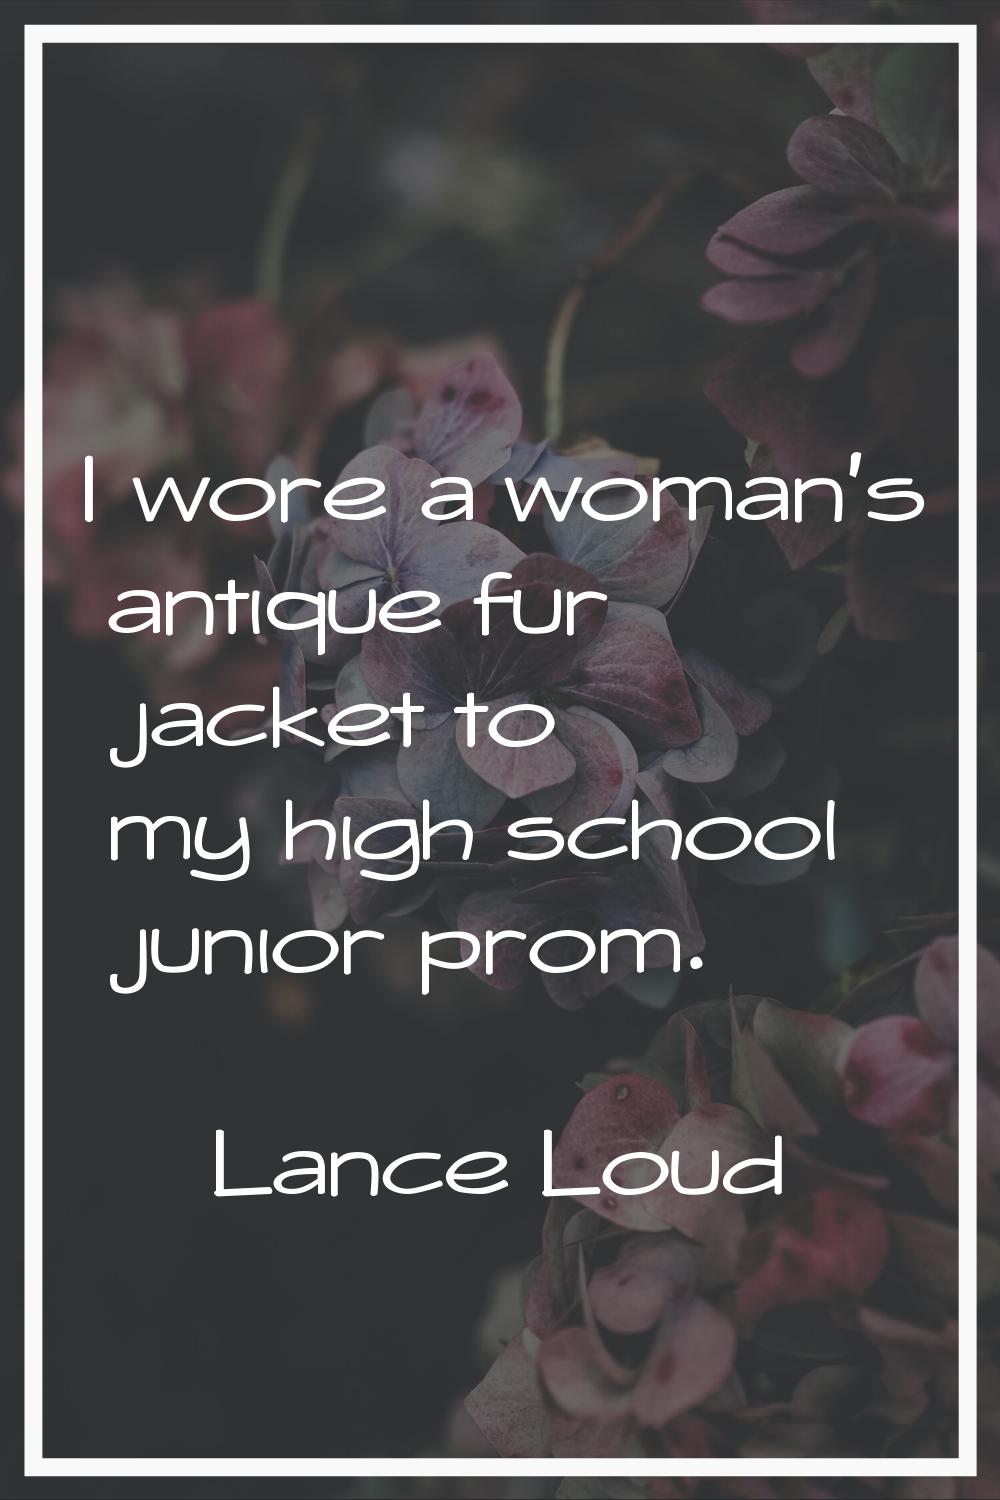 I wore a woman's antique fur jacket to my high school junior prom.